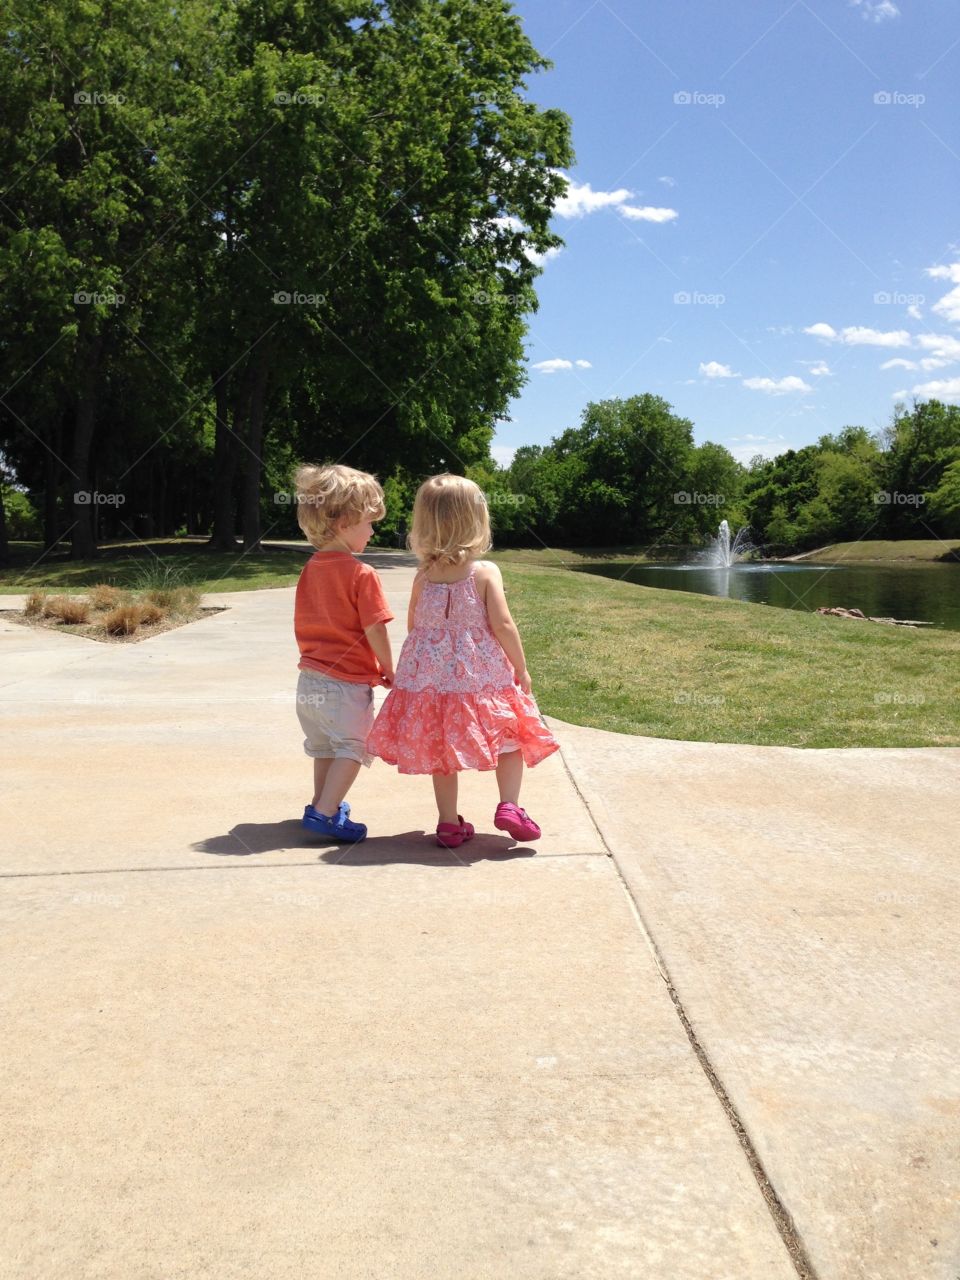 Twins looking at pond. Twins at the park